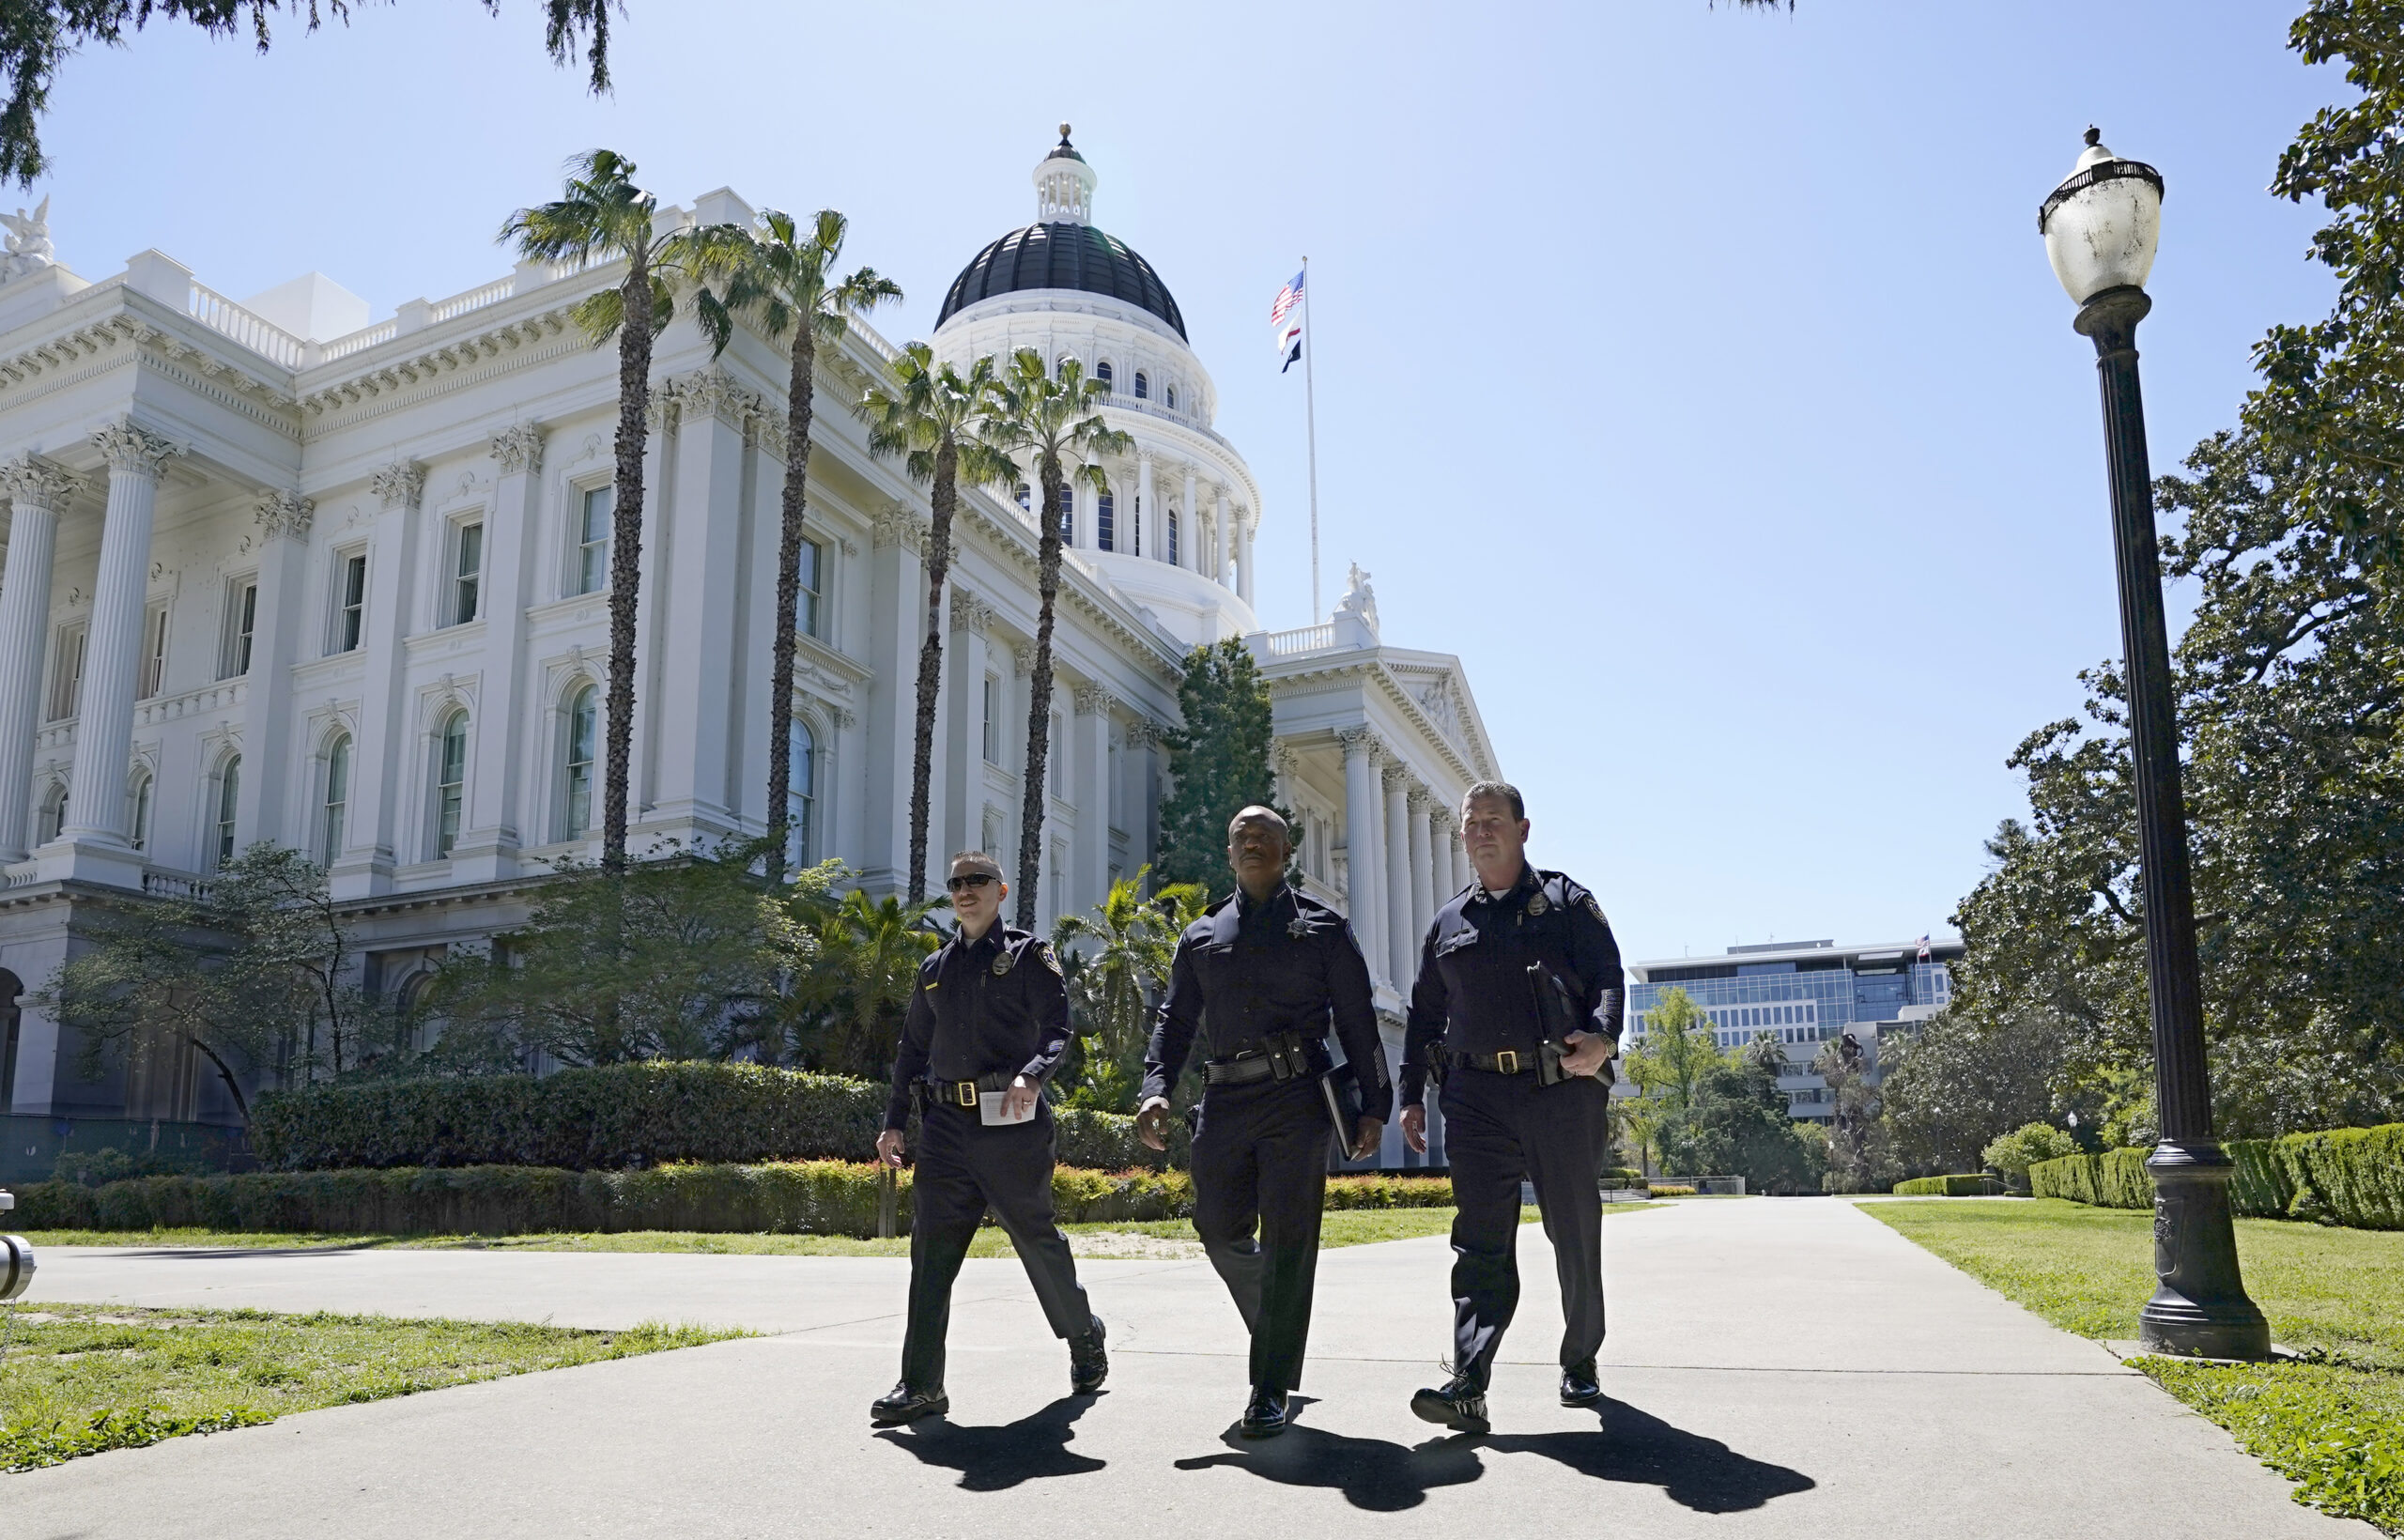 After Shootings, Suspect Threatened California Capitol: Police